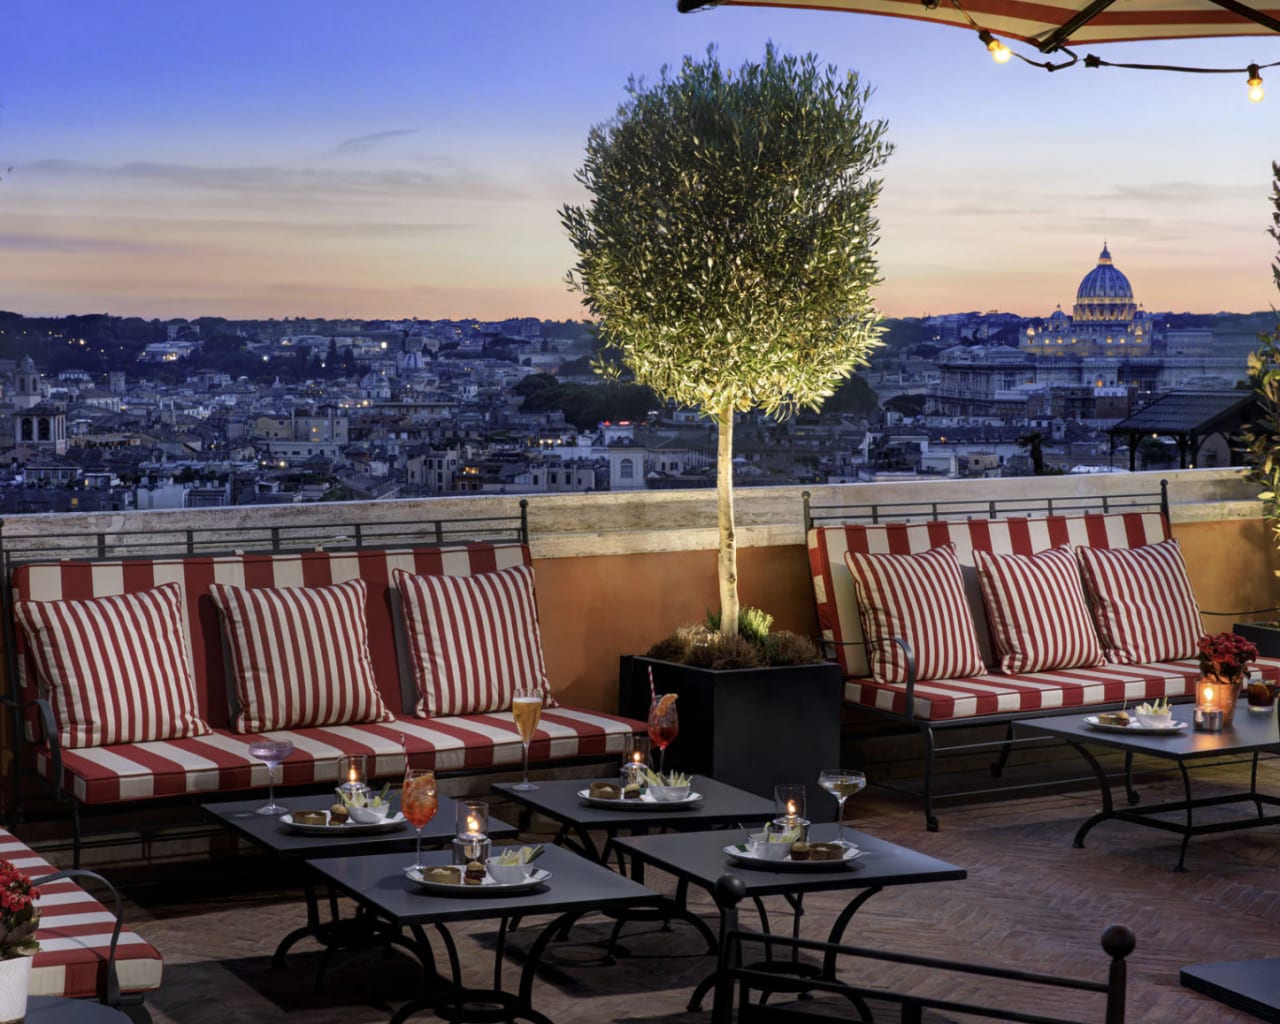 Best rooftop bar in Rome